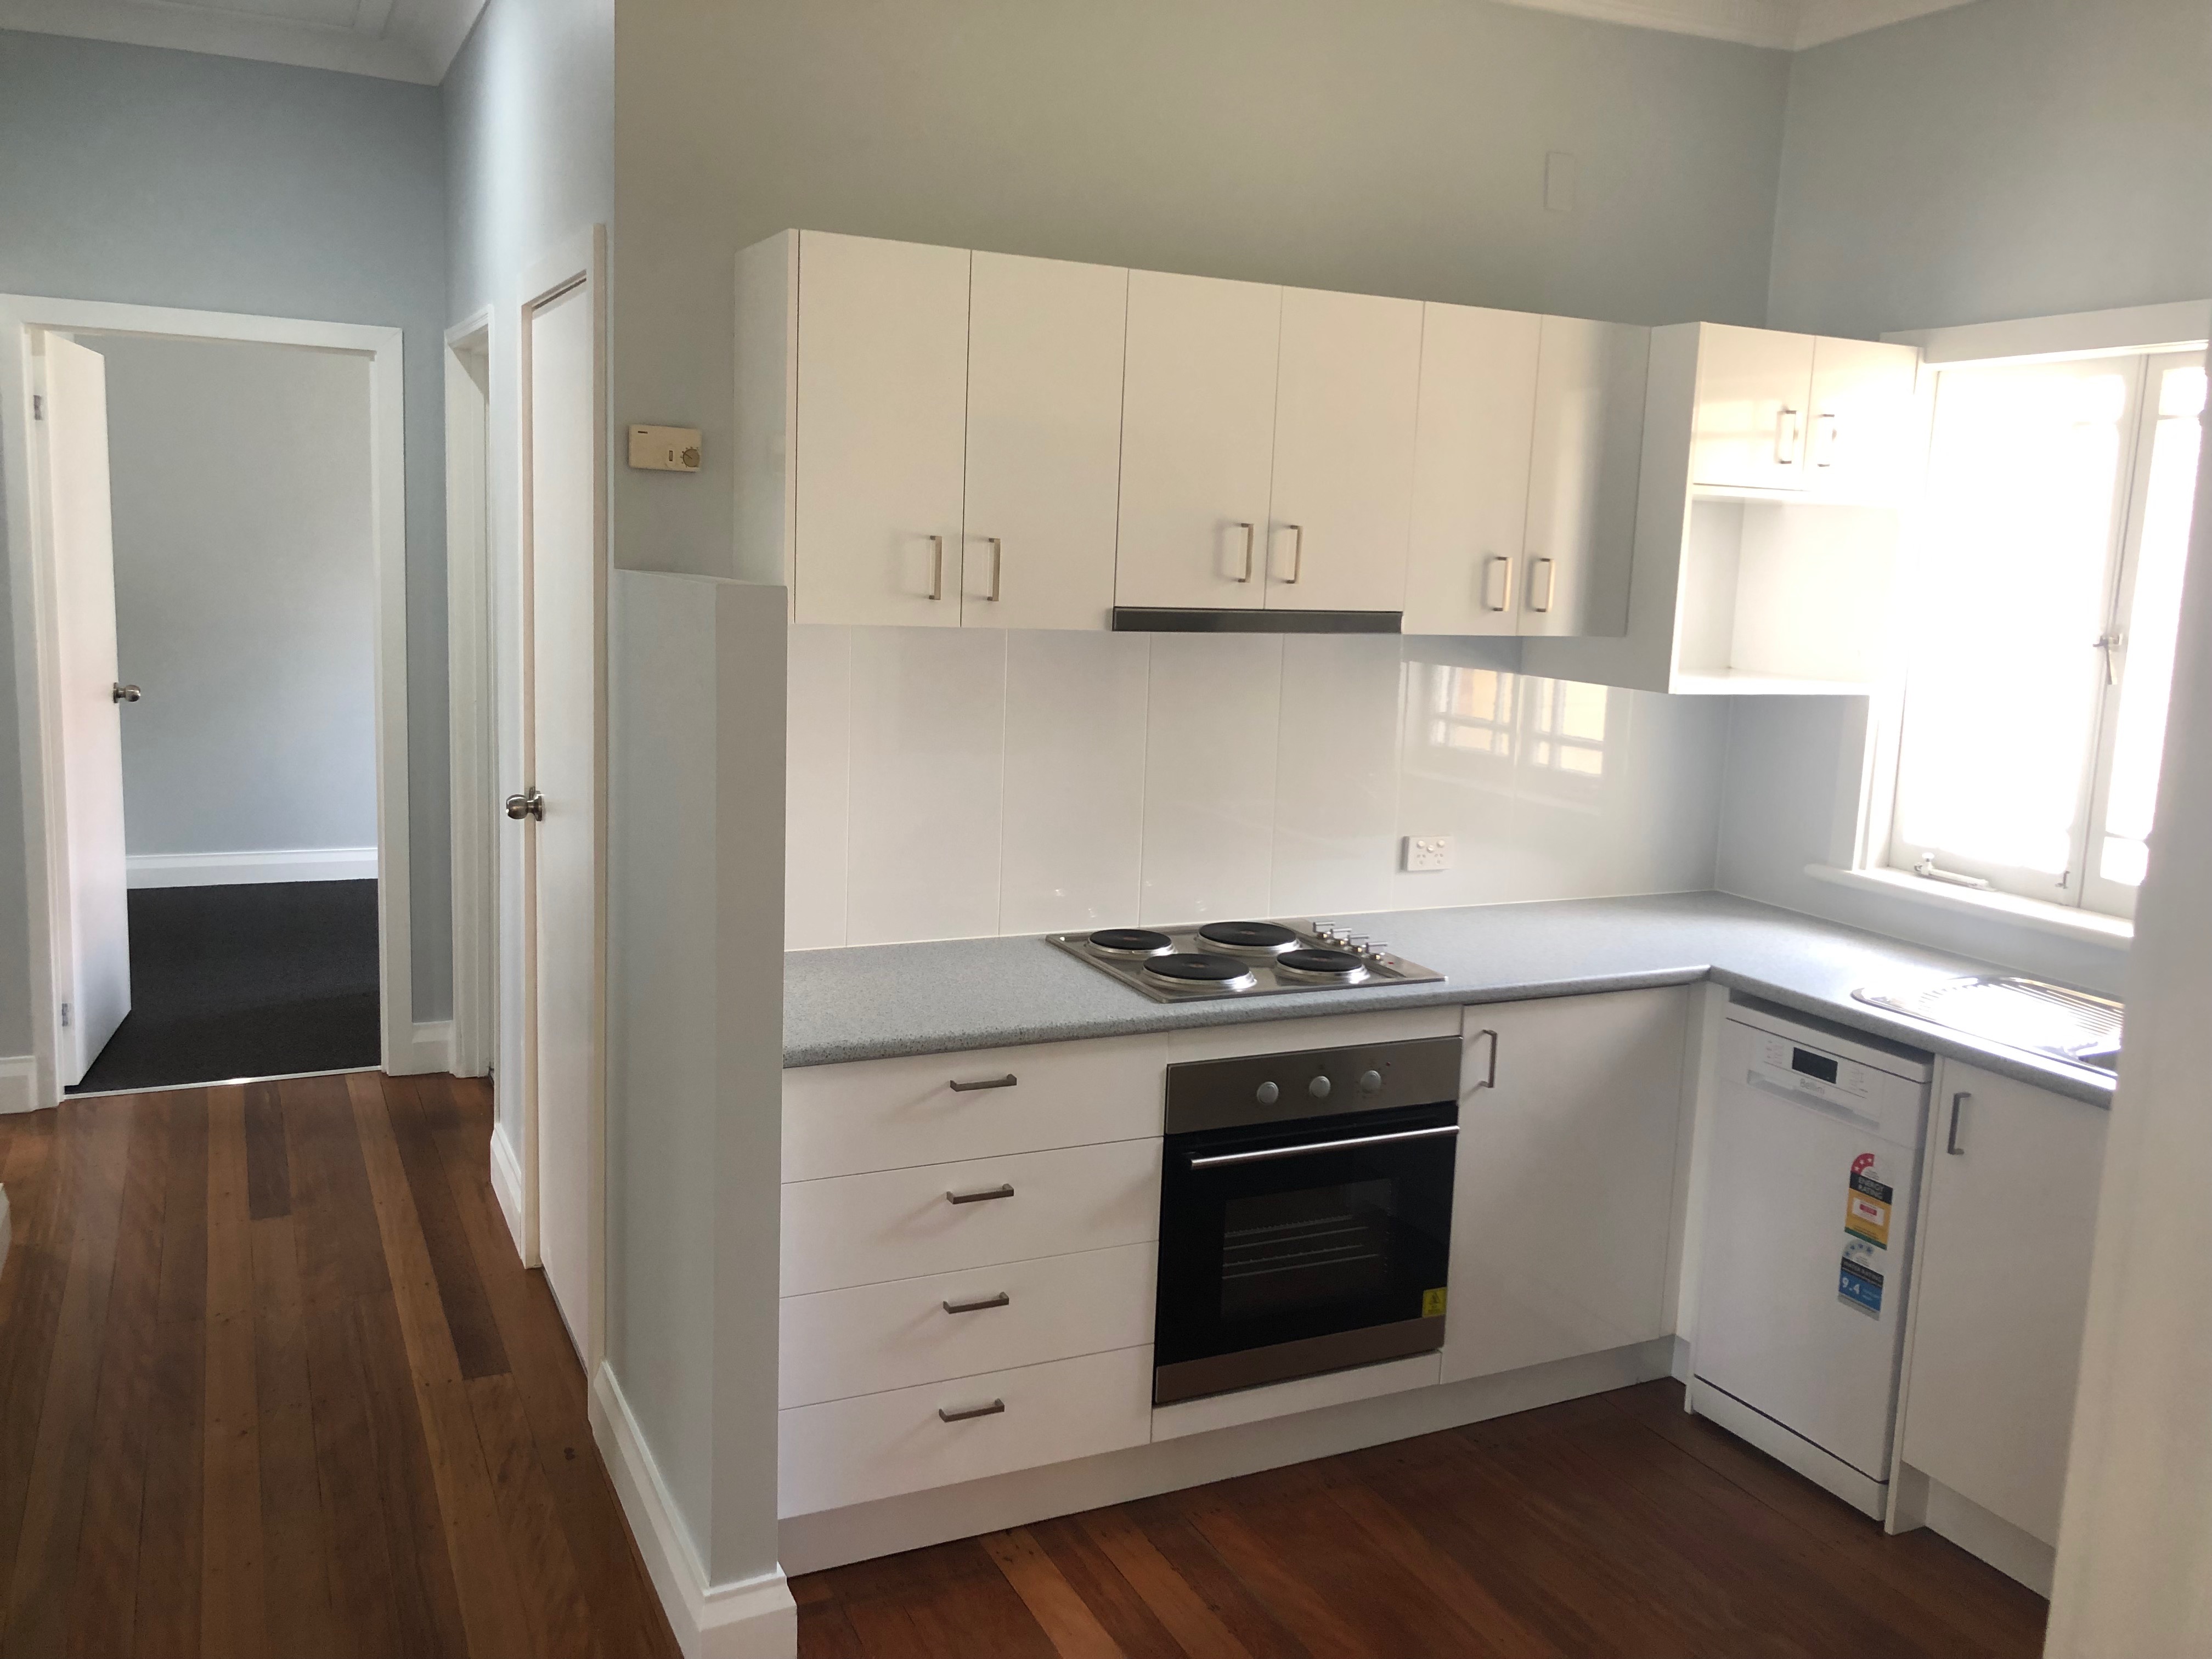 completed building maintenance in Brisbane view of newly refurbished kitchen in student boarding house white build in cupboards and oven laminate wood floors